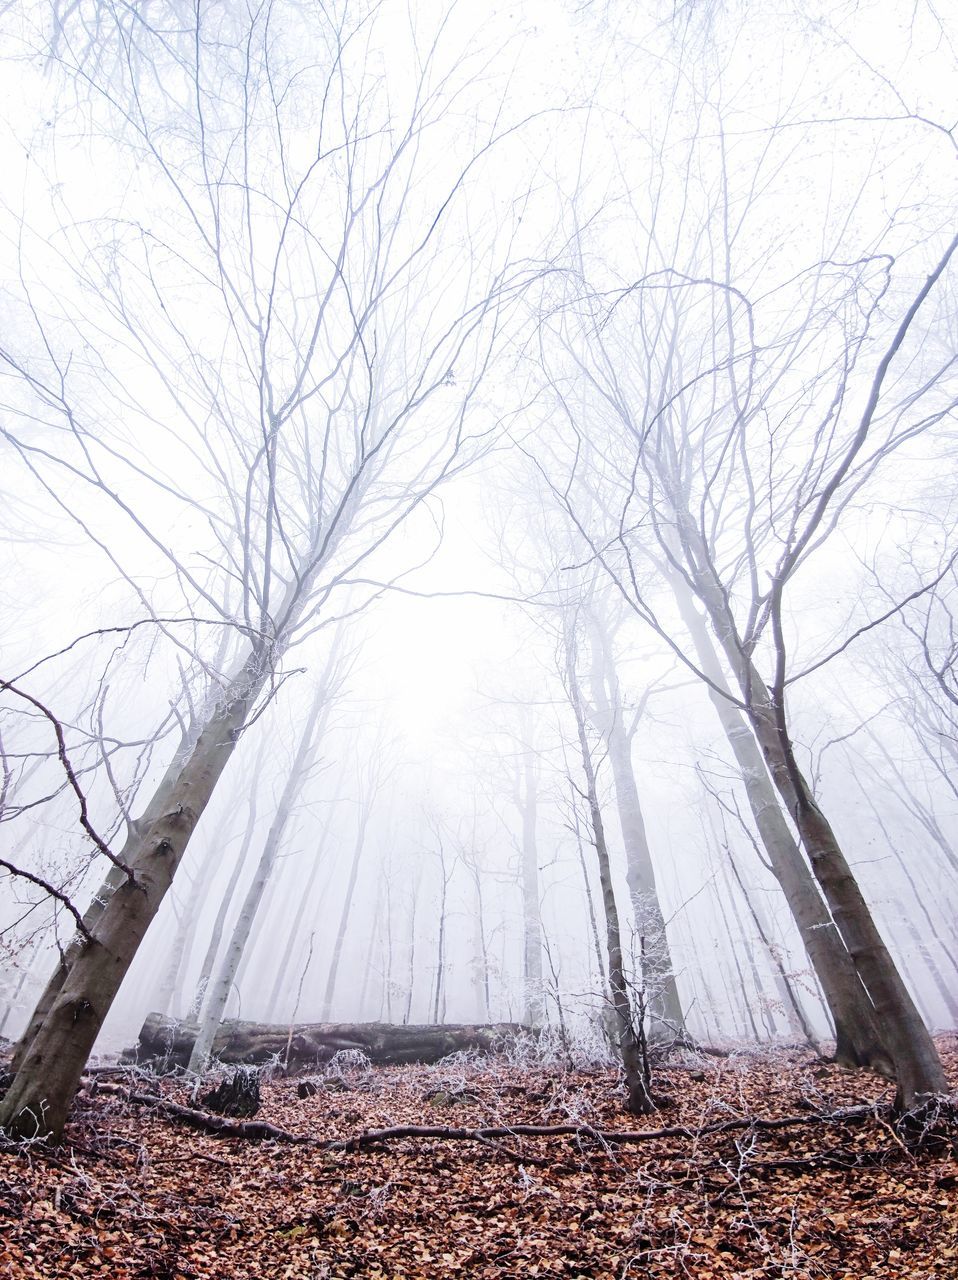 VIEW OF BARE TREES IN FOGGY WEATHER